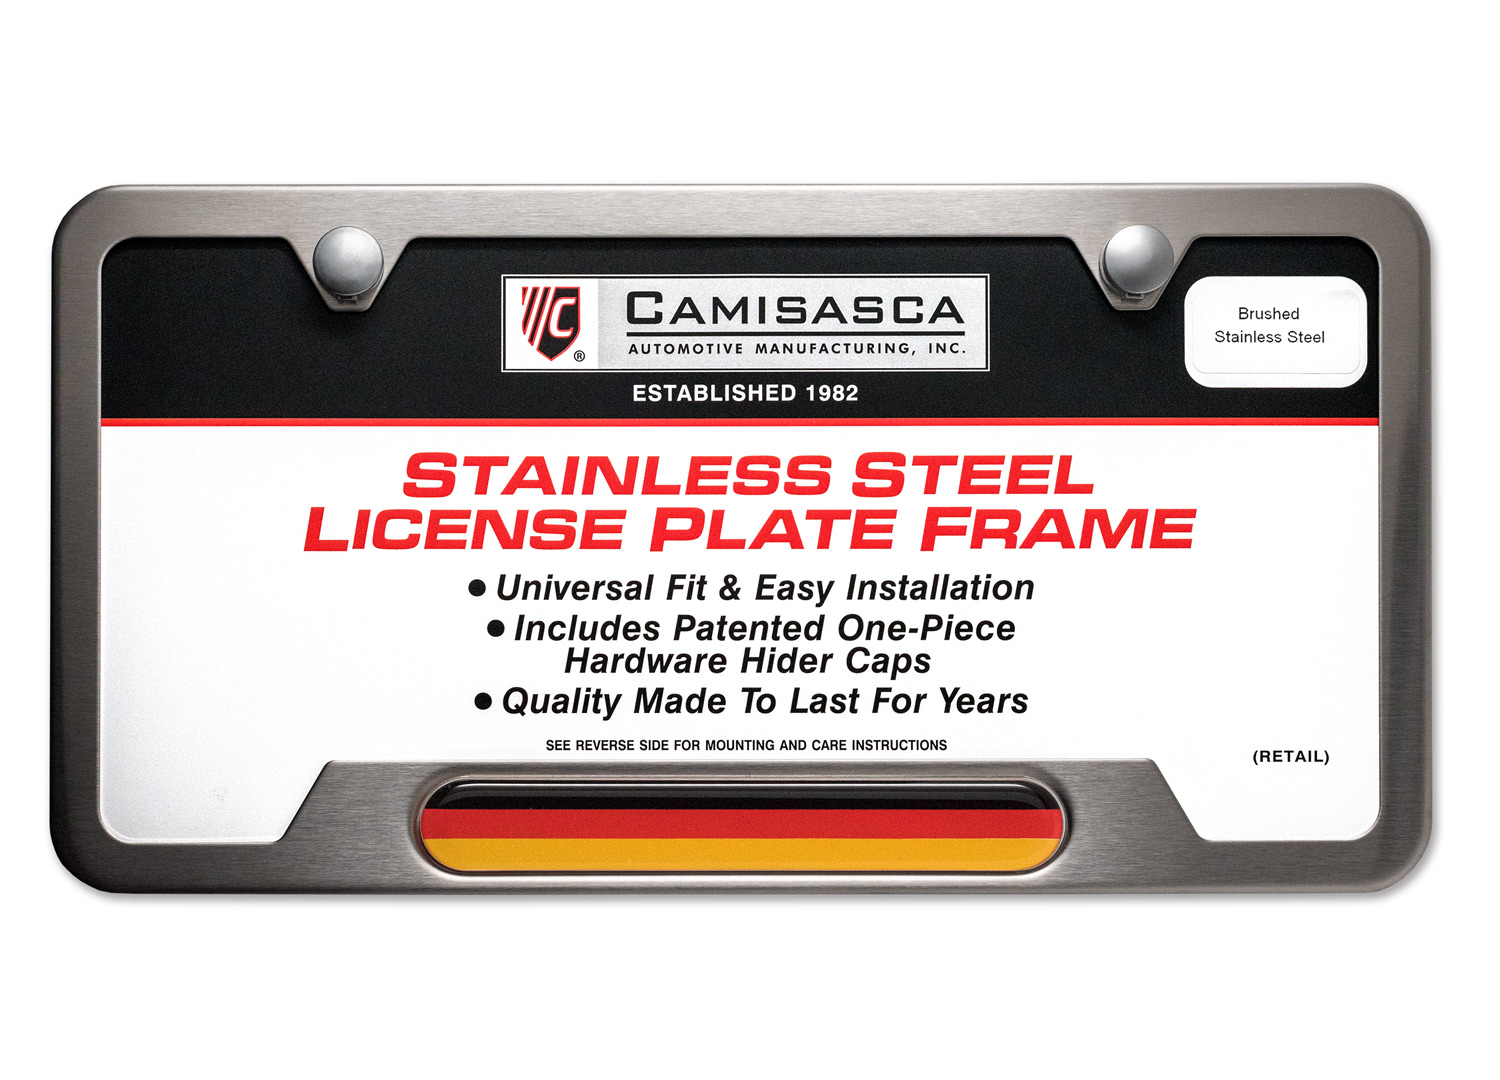 LIMA PERU FLAG COUNTRY License Plate Frame Stainless Metal Tag Holder 